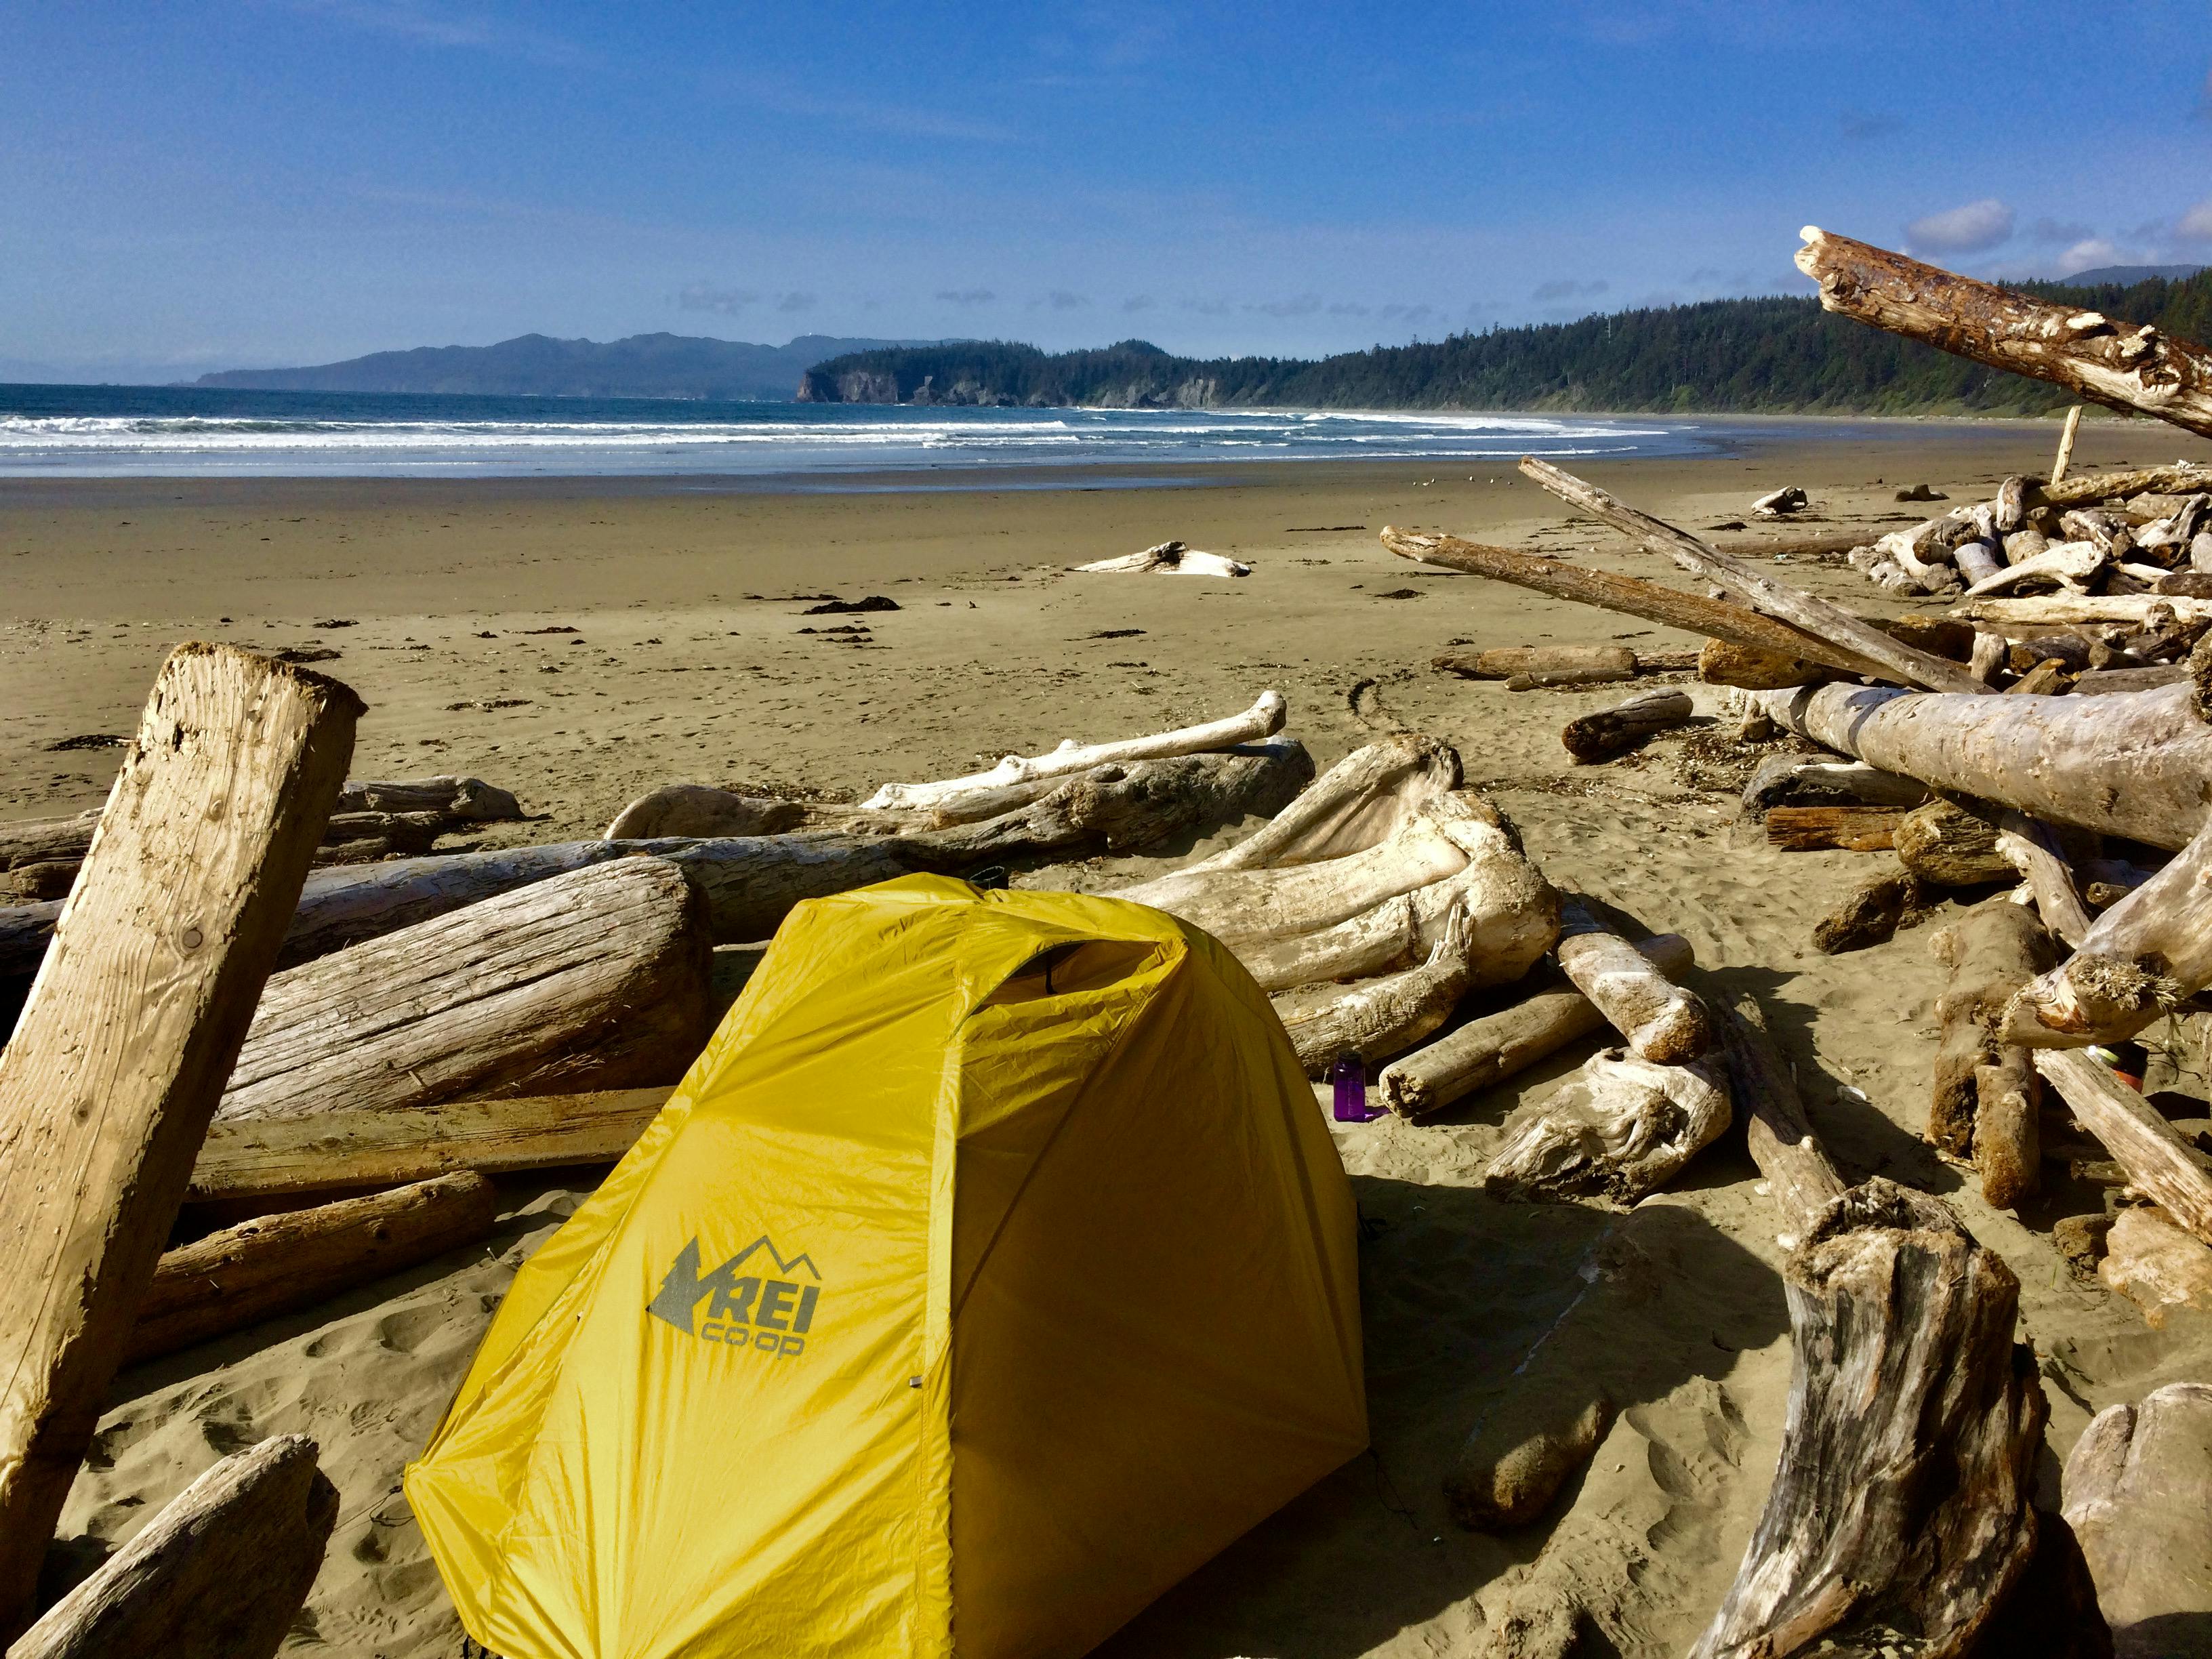 Backpacking on the beach with an REI tent.